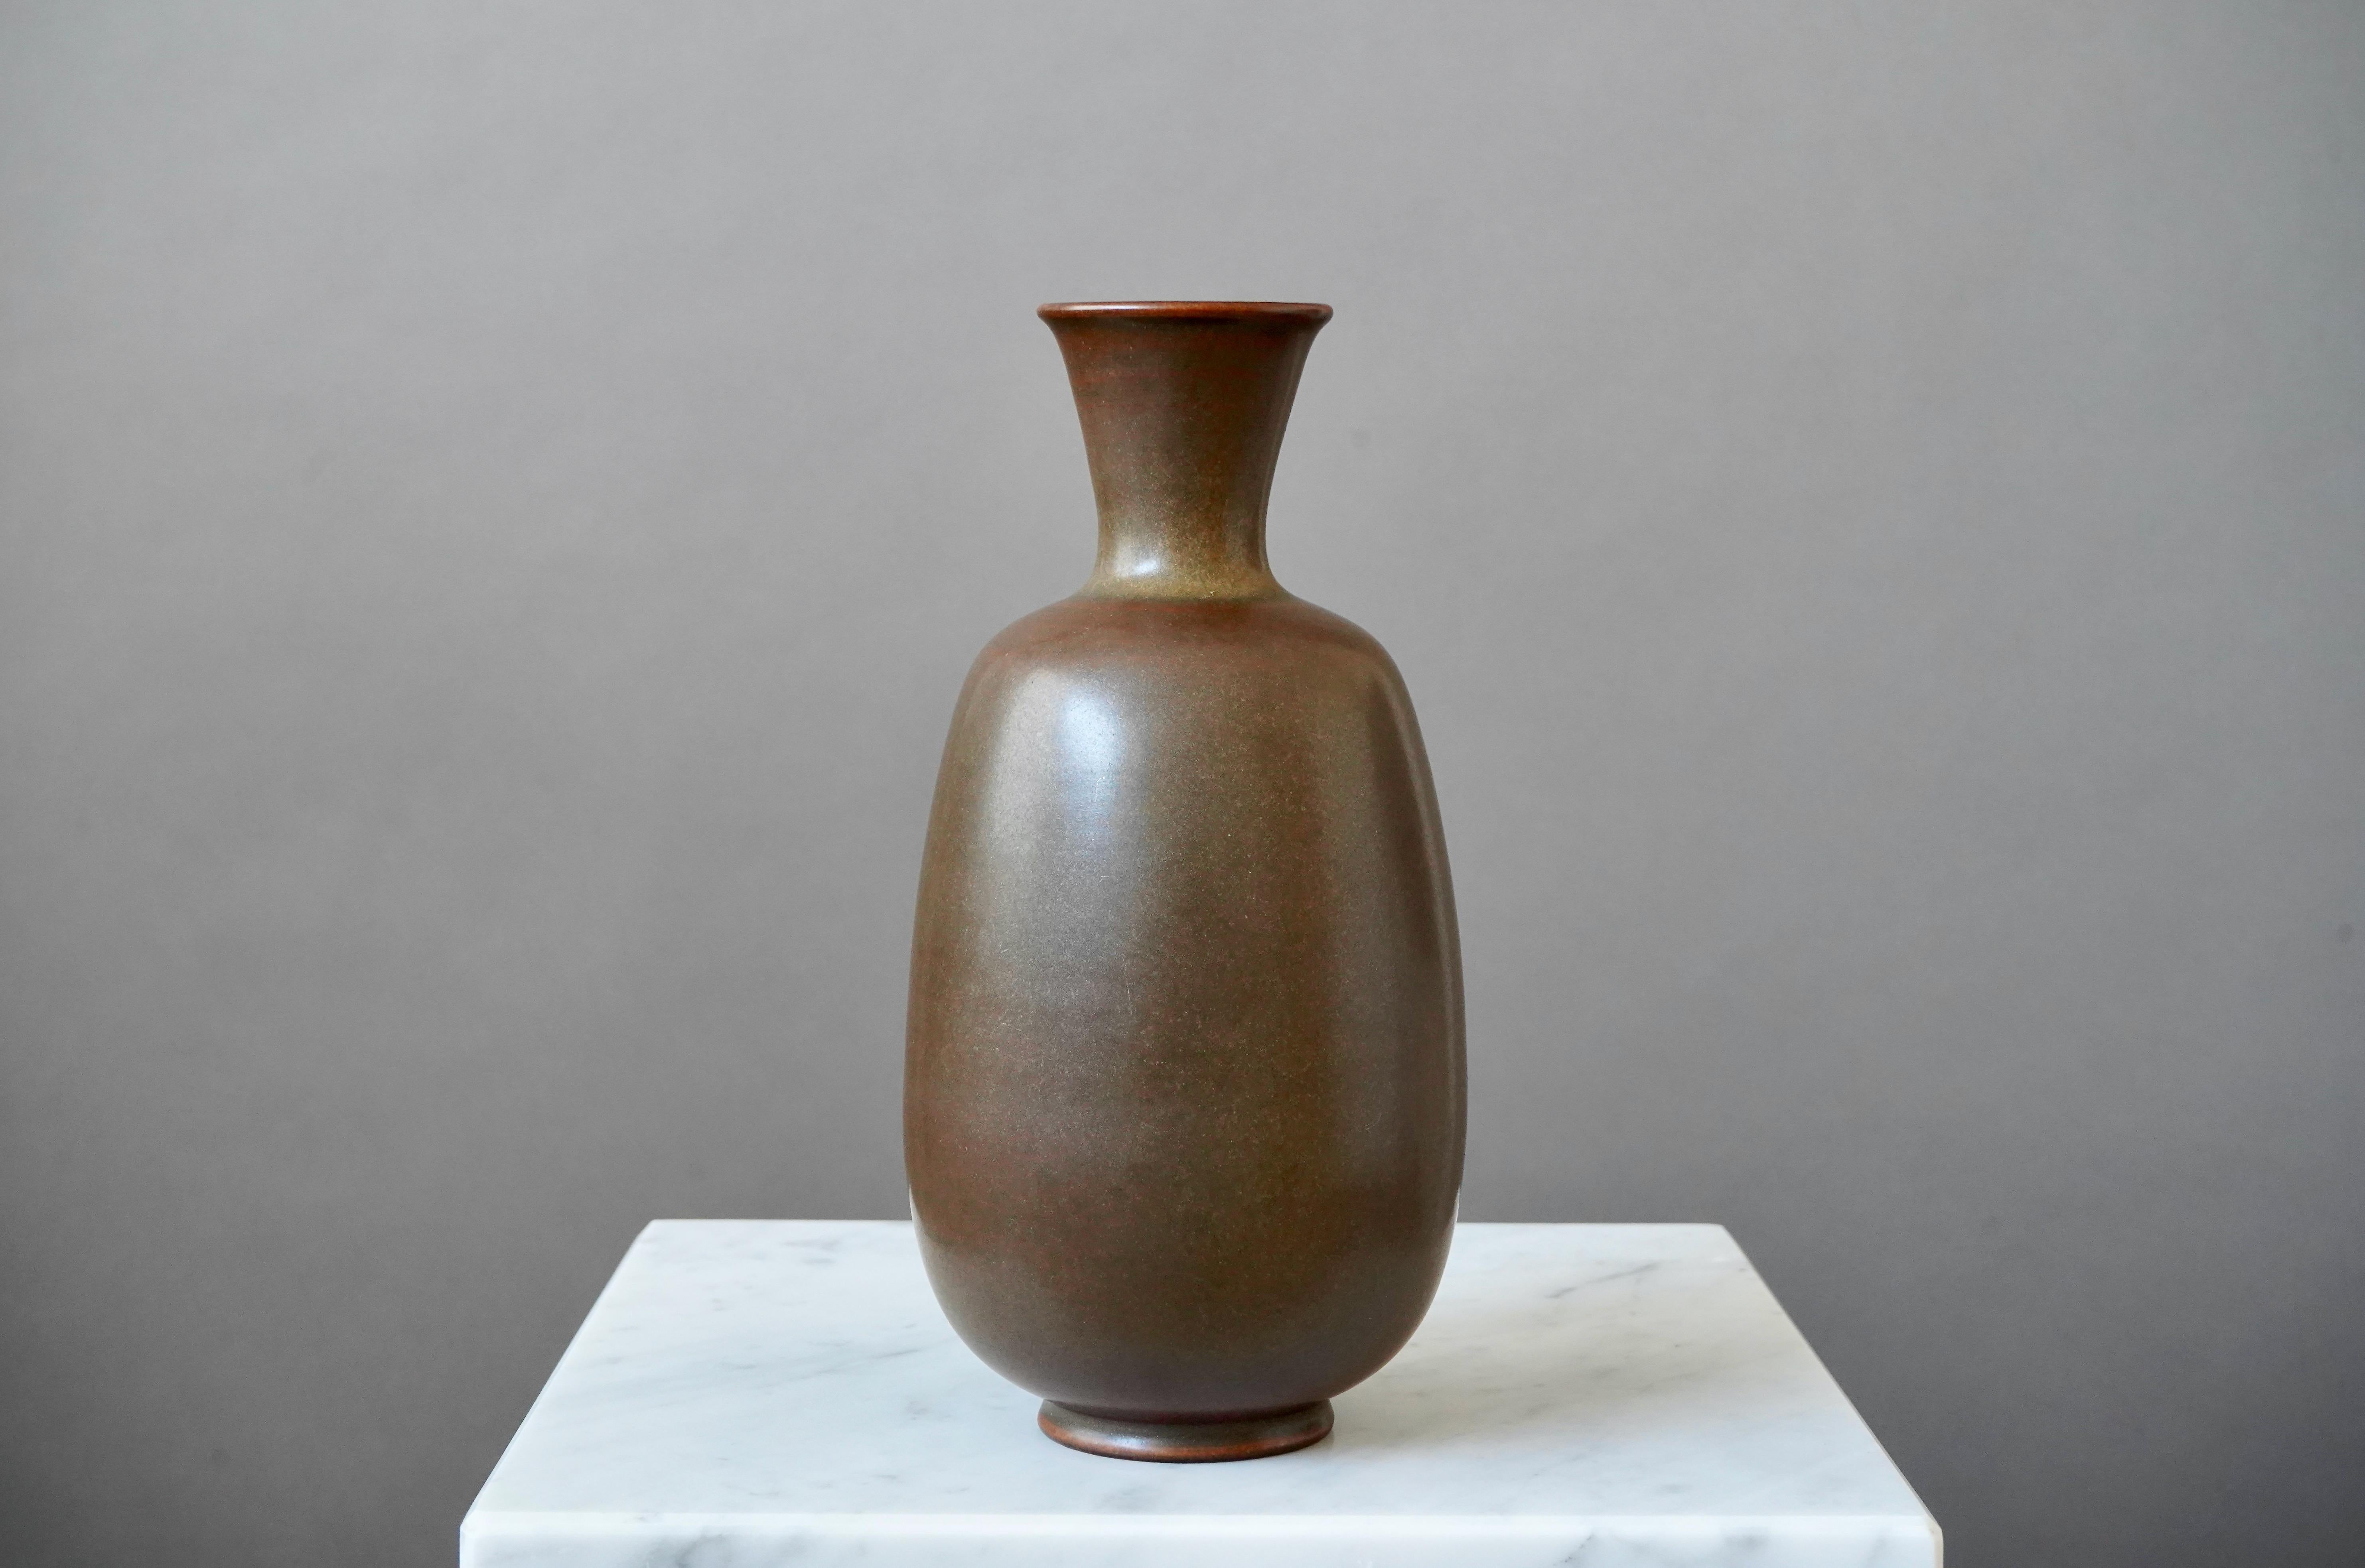 Beautiful stoneware vase made by master ceramists Erich and Ingrid Triller.
This piece was created at their workshop in Tobo, Sweden, 1950’s.

Excellent condition. Signed on the base with their customary 